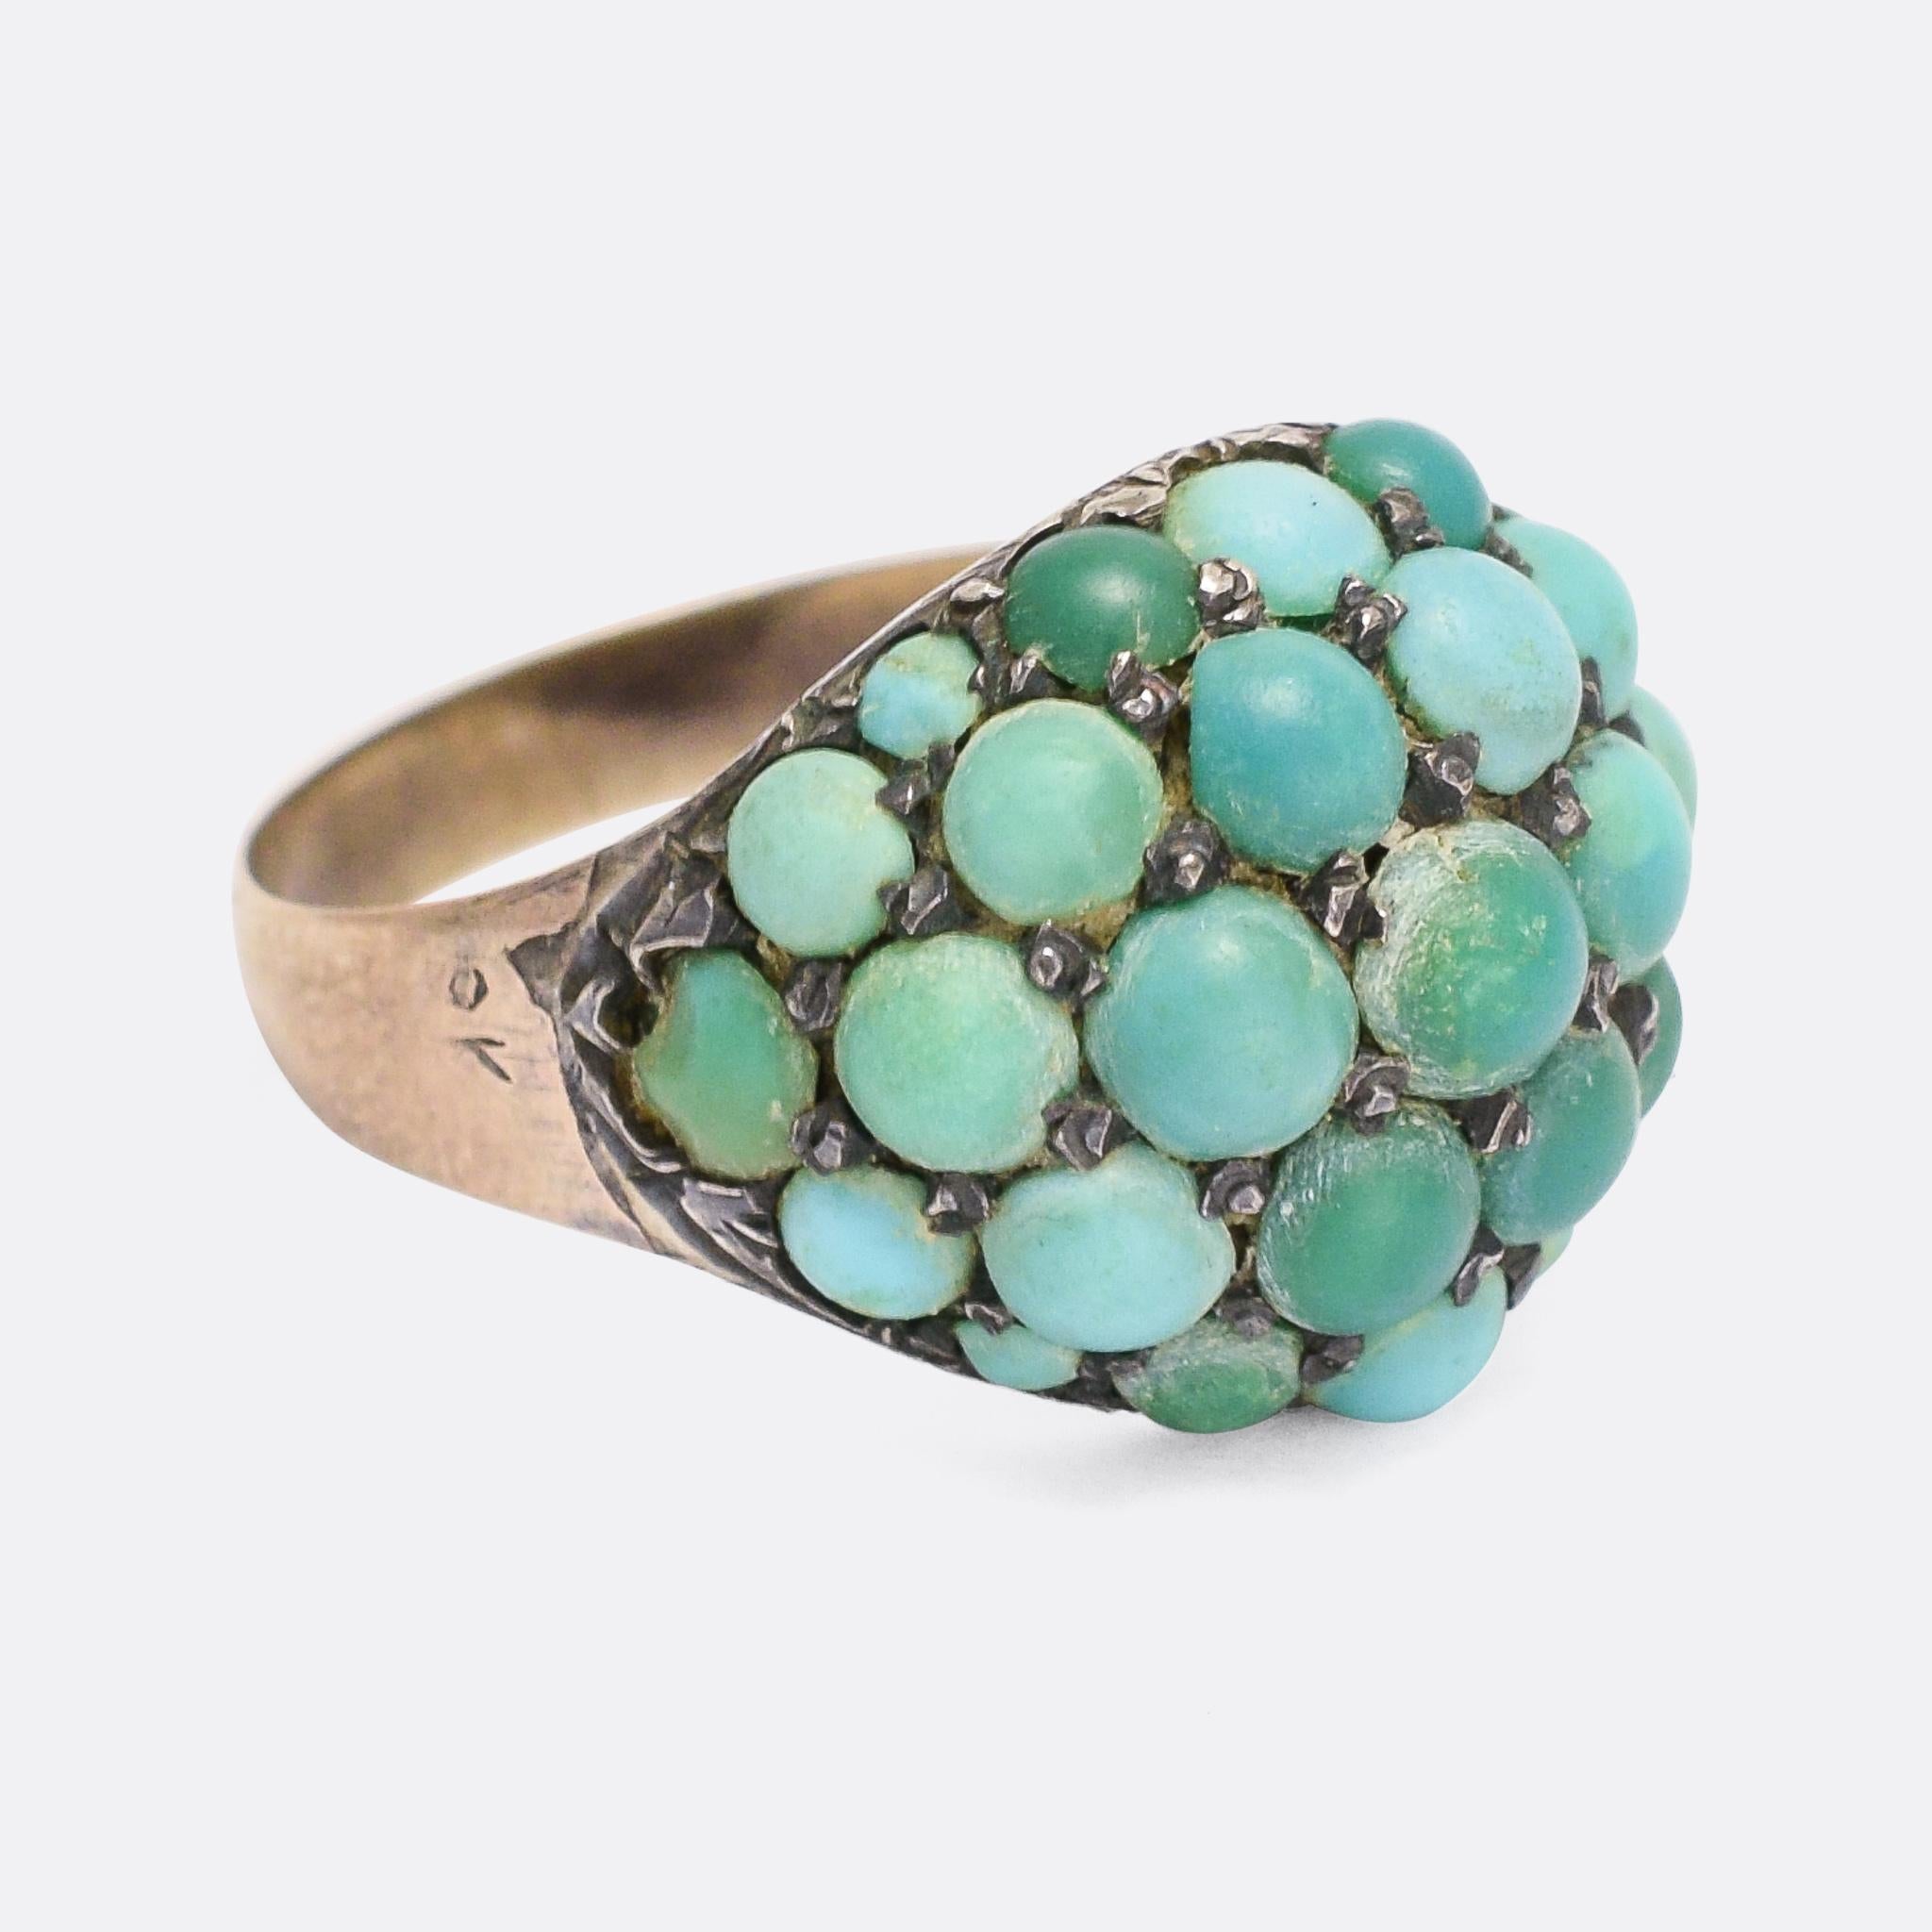 A fine Victorian bombé ring pavé set with turquoise cabochons. The band is modelled in 9k rose gold, while the stones are set in silver making a lovely two-tone metal contrast. Over the years the turquoise have aged beautifully, giving a pleasing